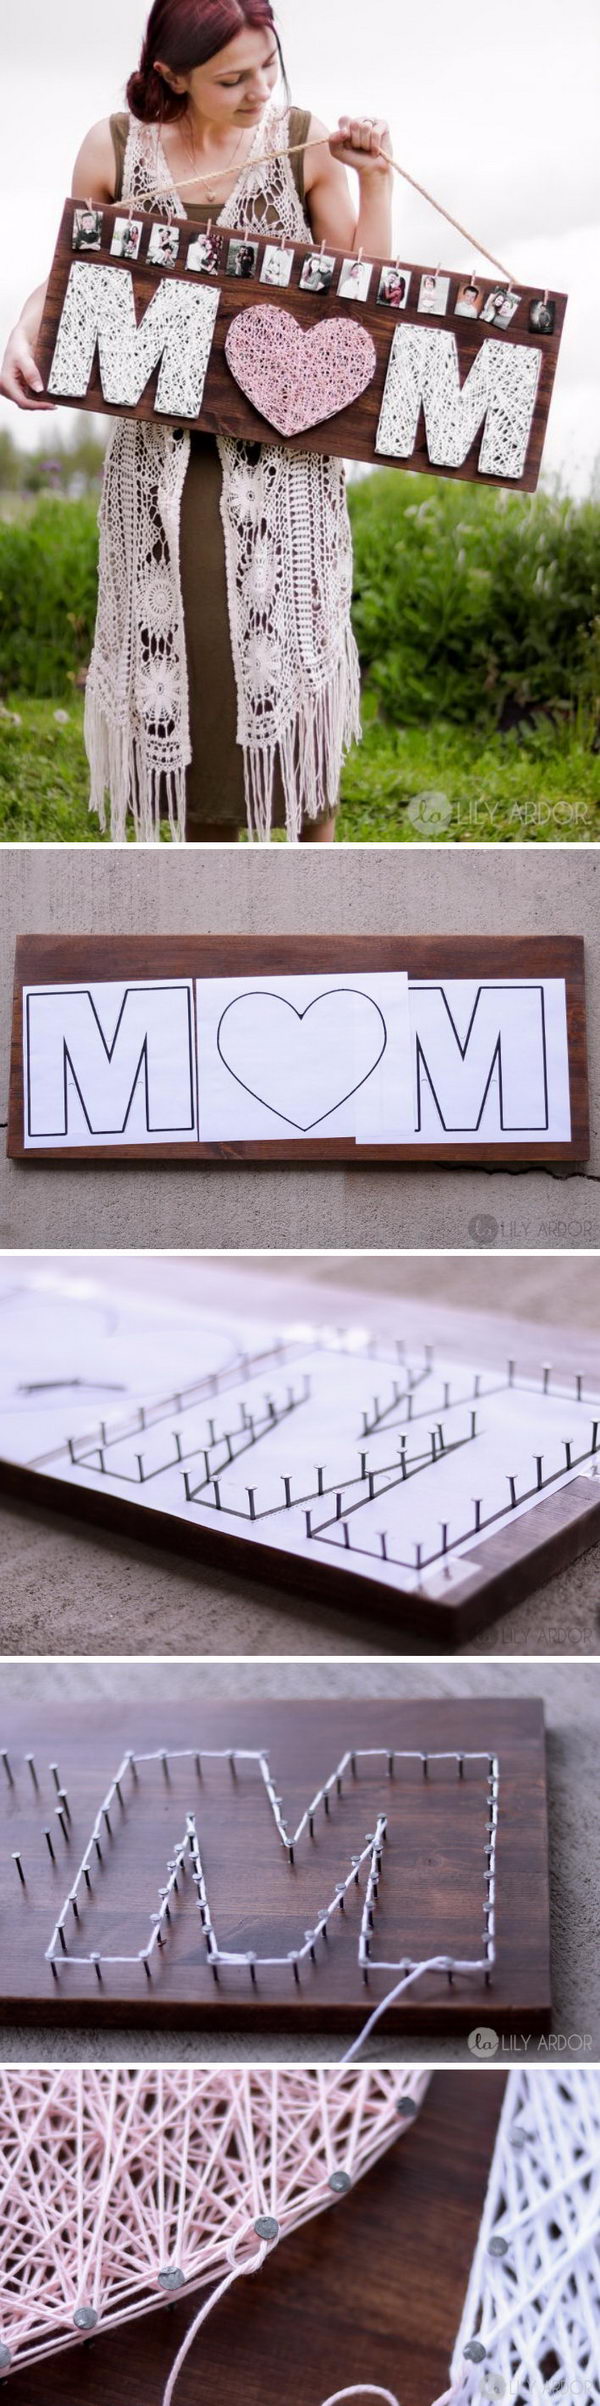 1 gifts for mom.jpg